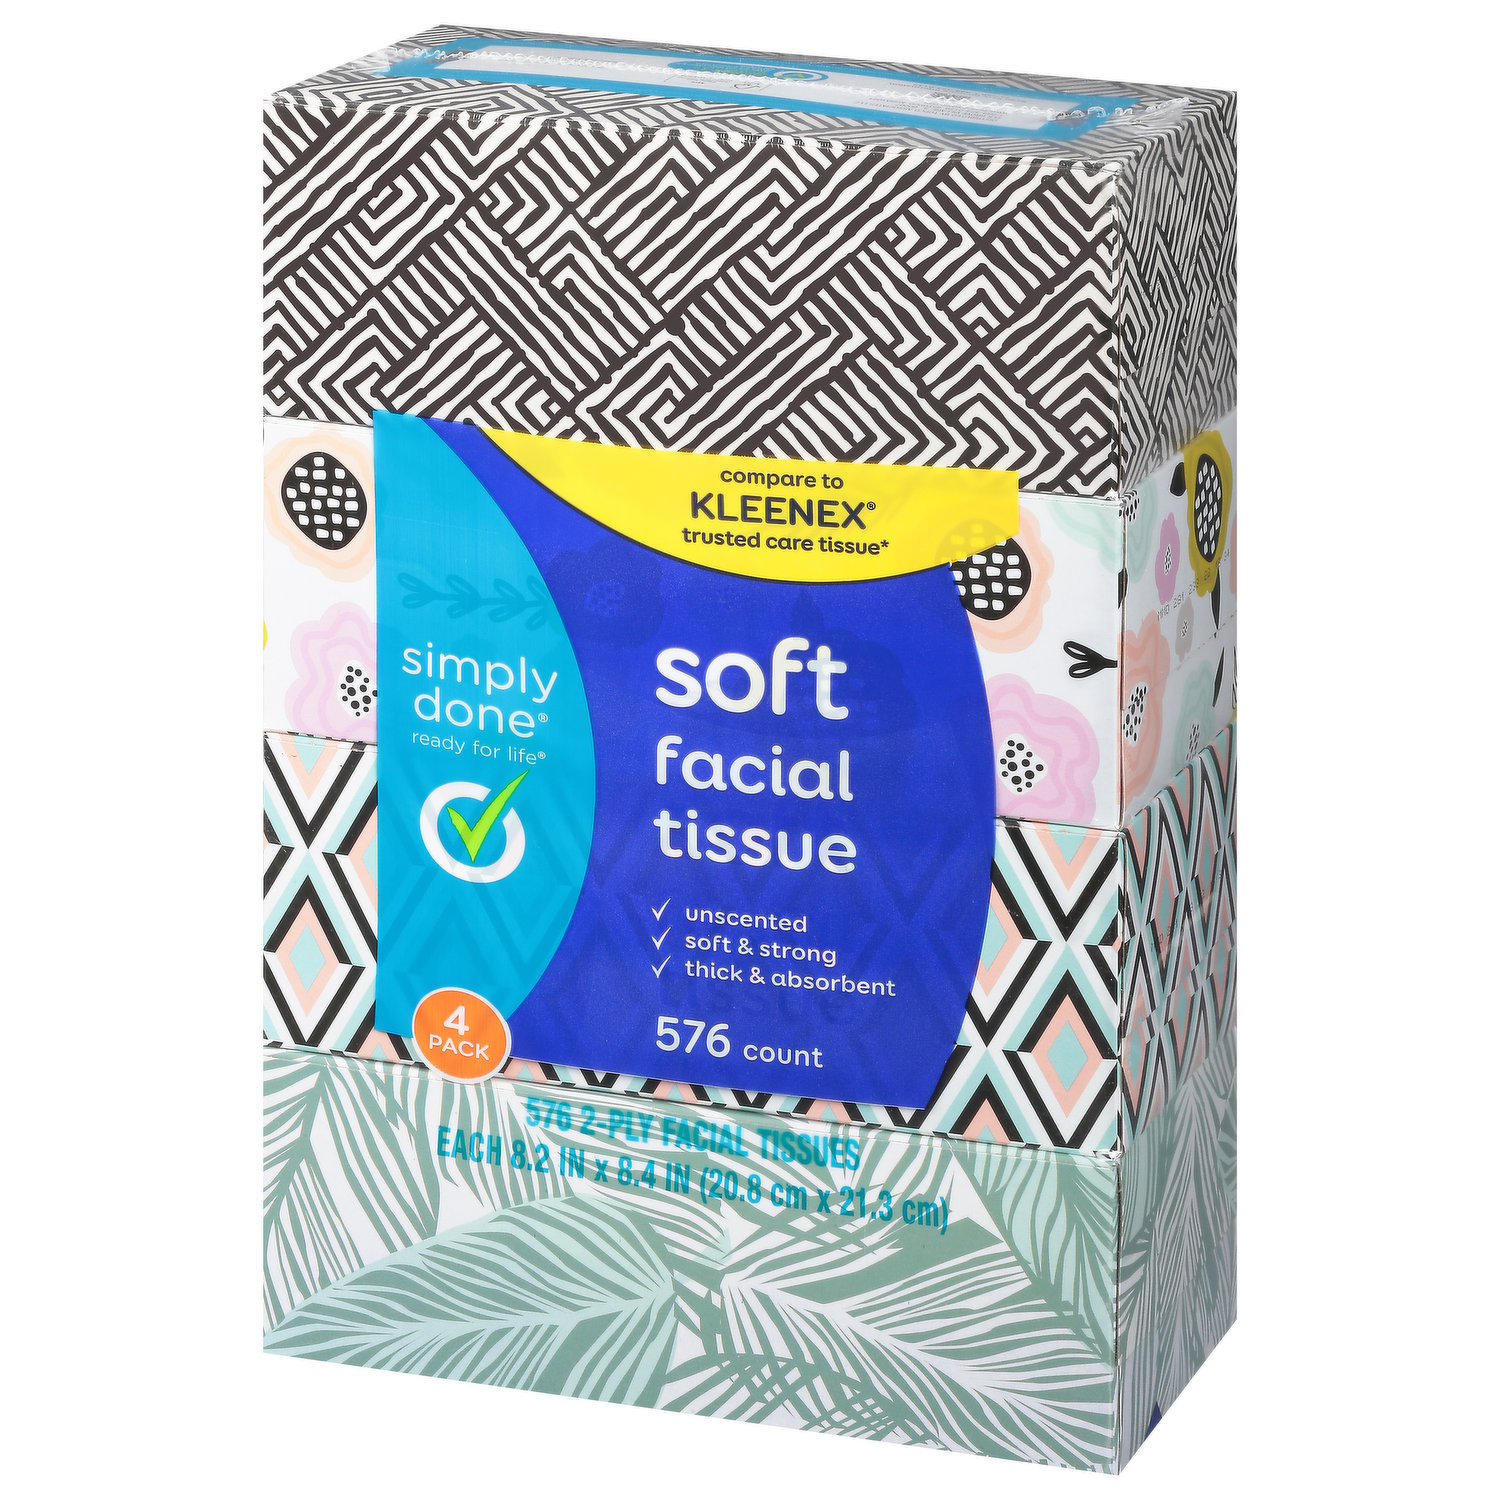 Simply Done Facial Tissue, Soft, 2-Ply, 4 Pack